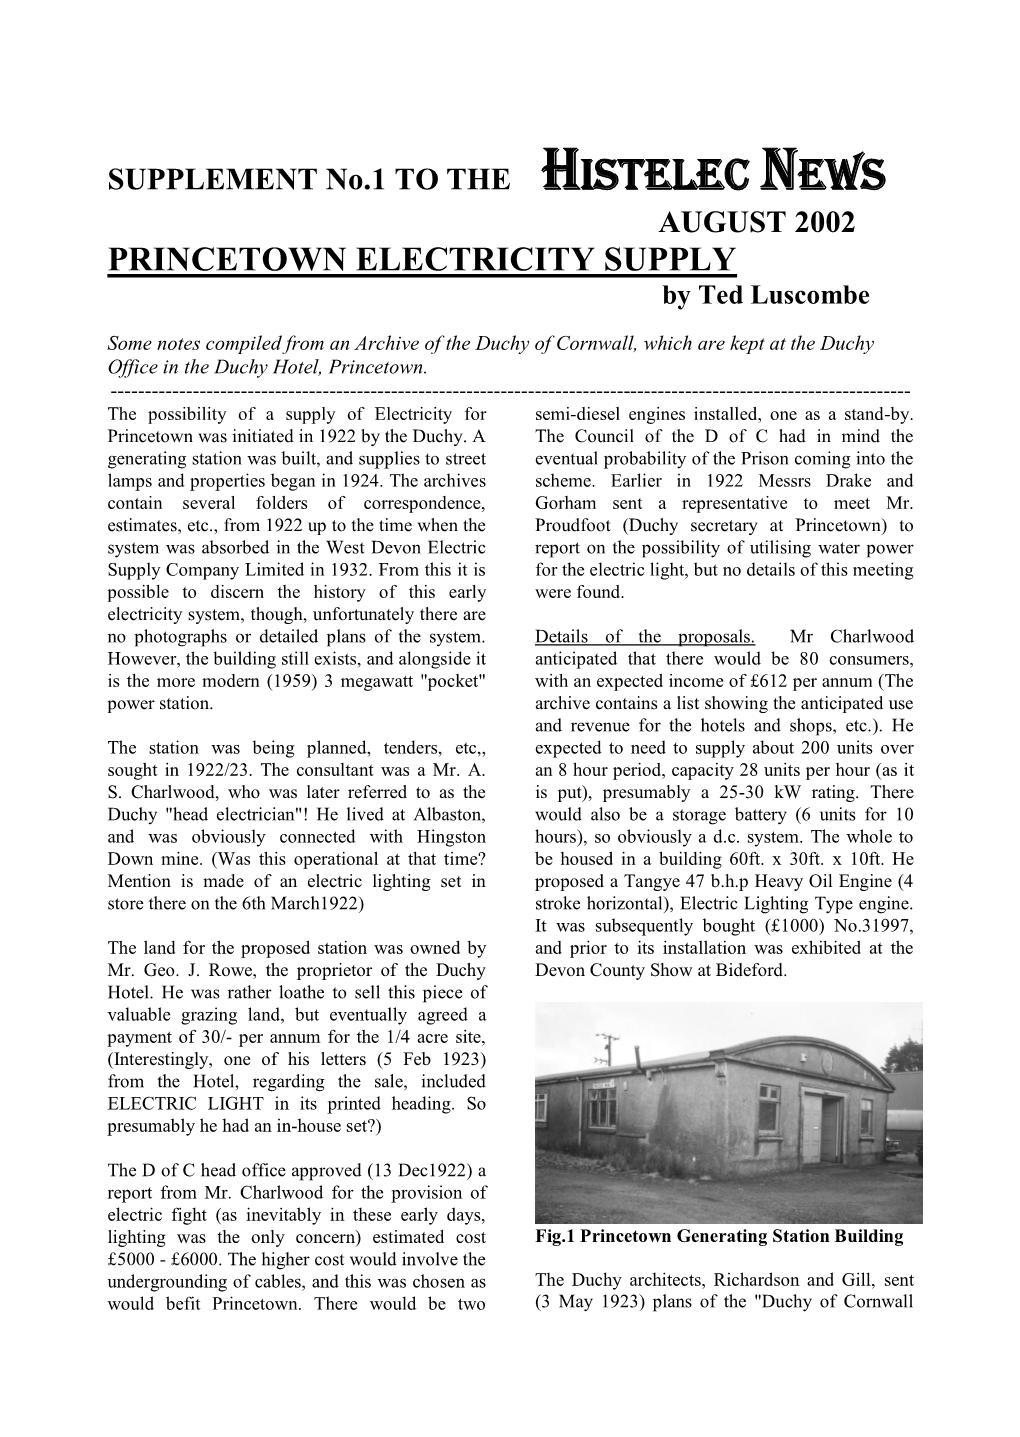 PRINCETOWN ELECTRICITY SUPPLY by Ted Luscombe